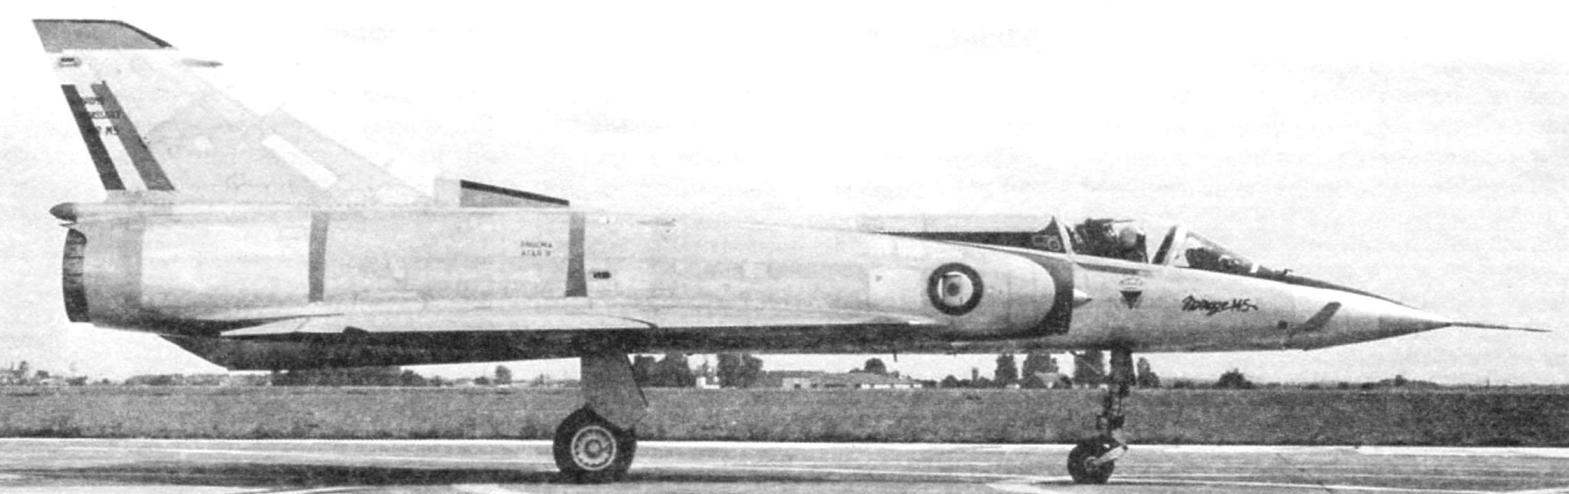 Mirage 5J, equipped with front horizontal surfaces. 1972